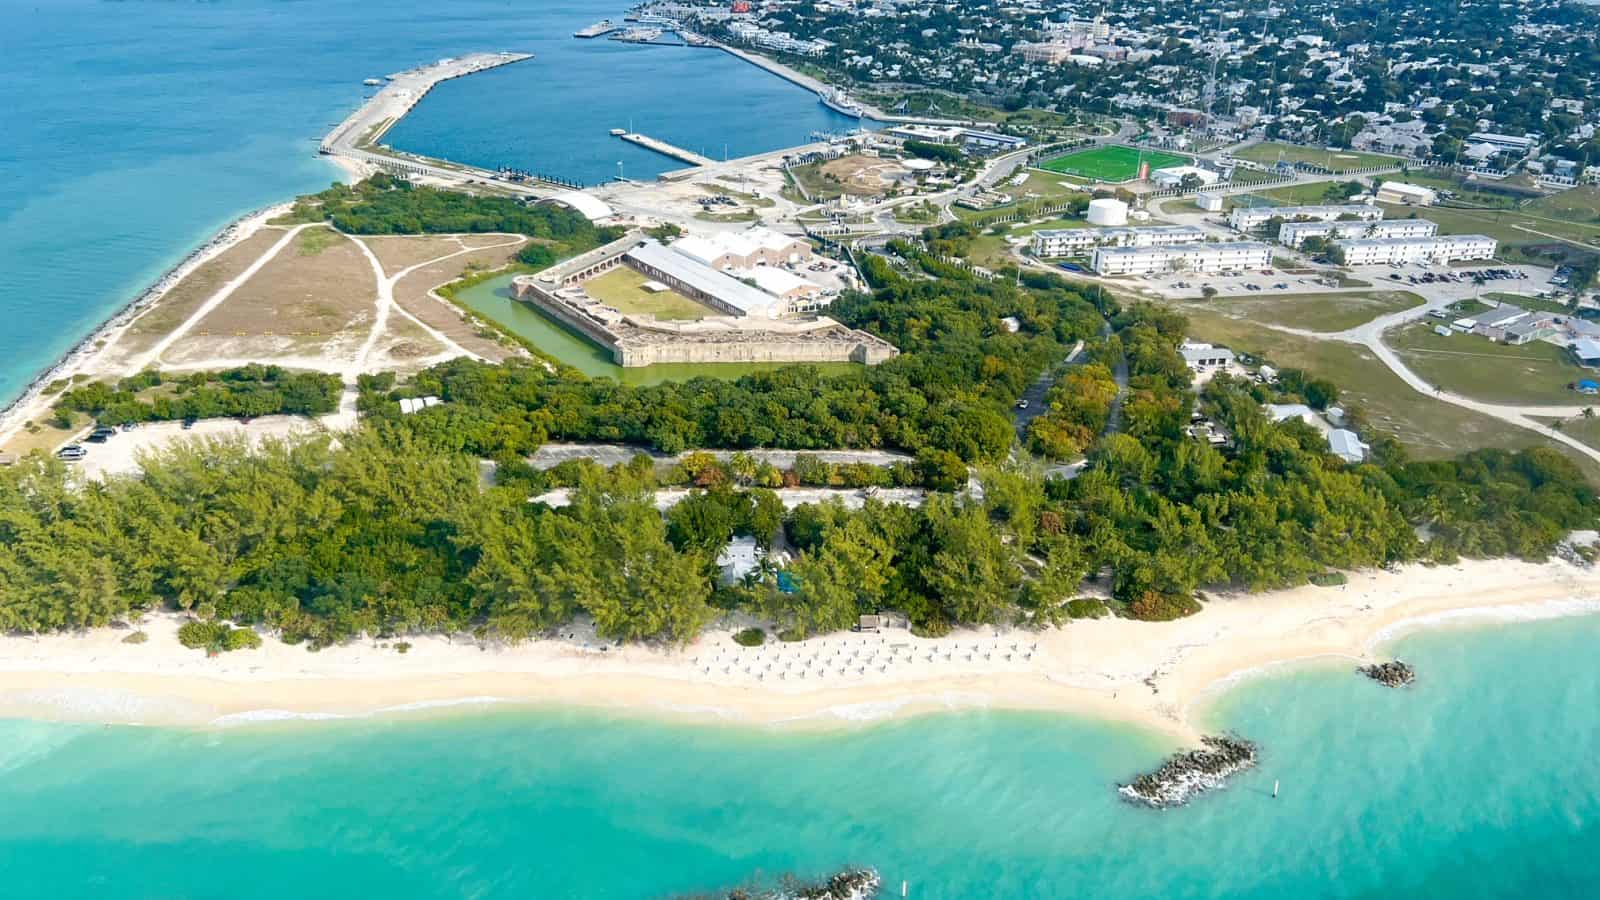 Aerial view of Fort Zachary Taylor State Park with the beach in the foreground and the four stone walls of the fort in the background, surrounded by foliage.